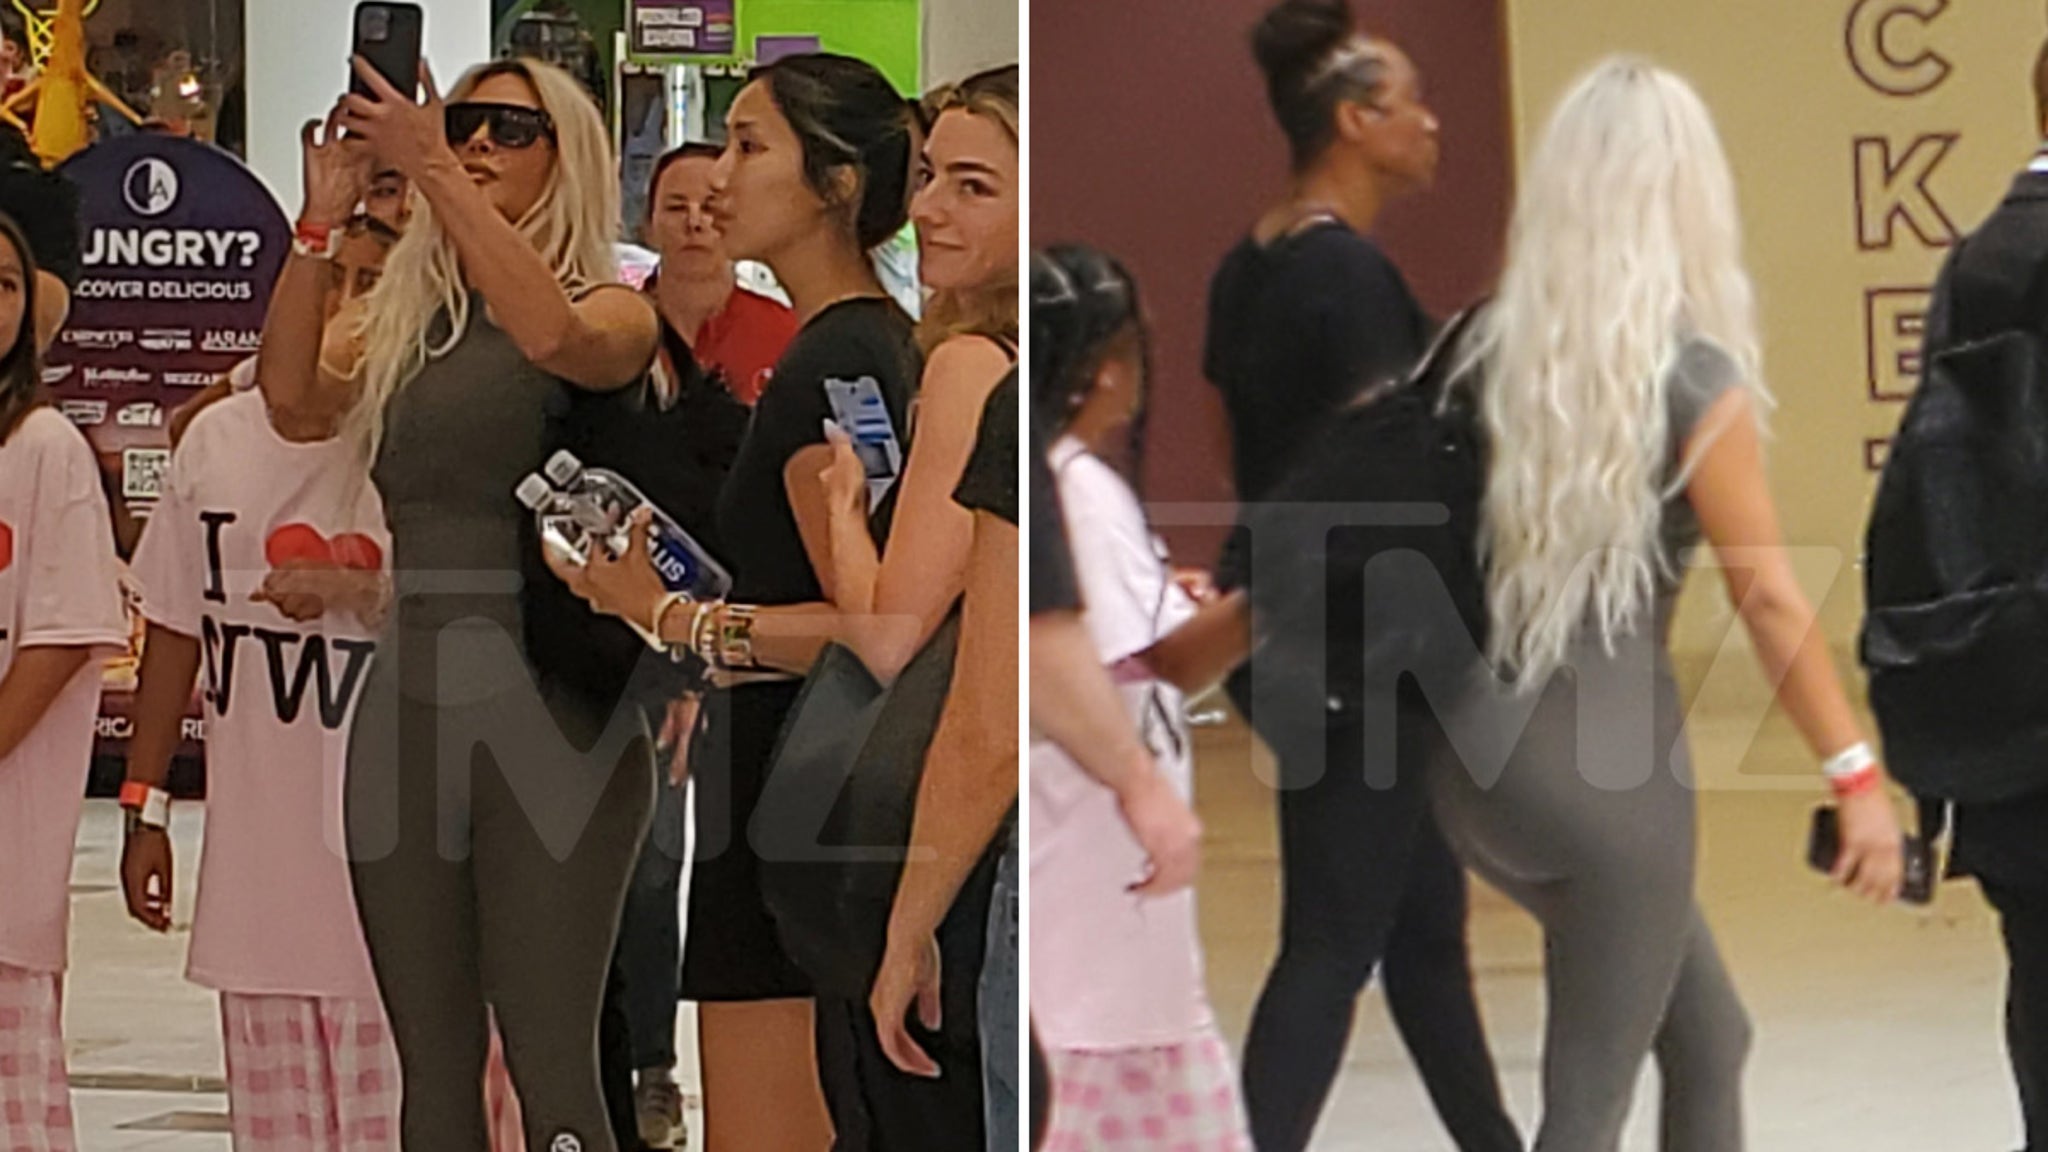 New Photos & Video of North West's 11th Birthday Party, Kim K Plays Proud Mom